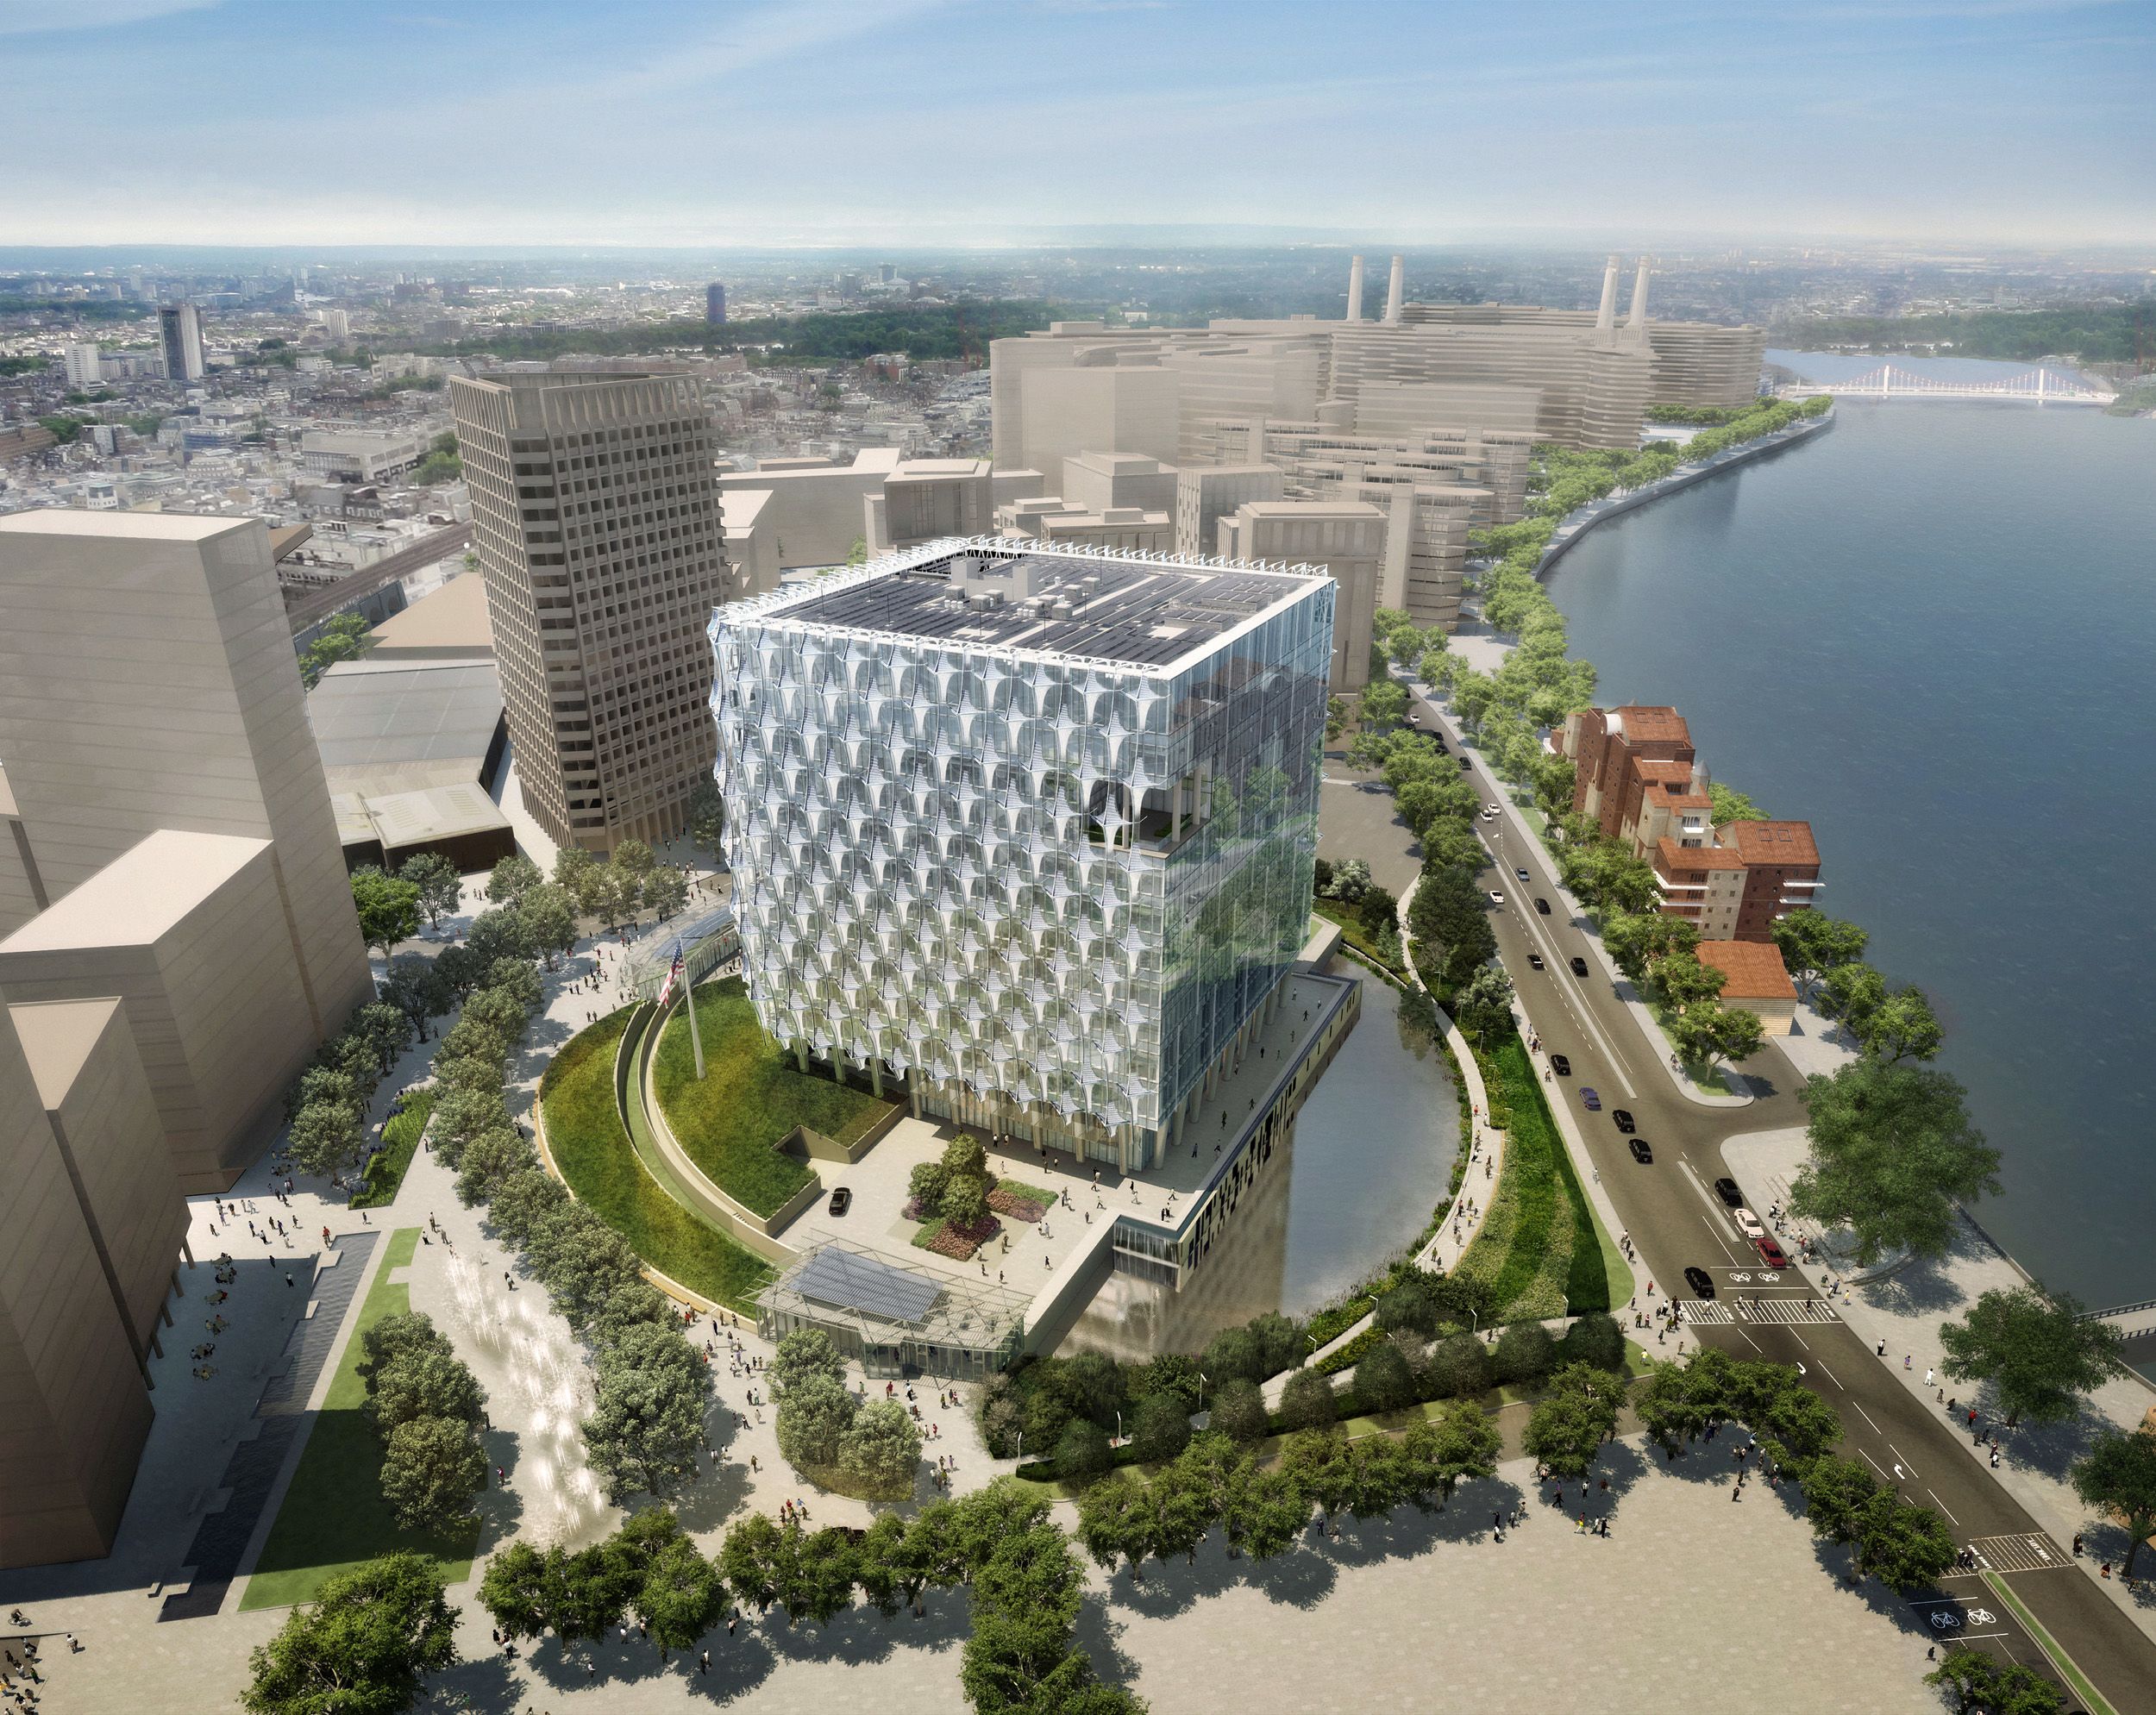 Bjarke Ingels Group May Include a Moat in Its Design for the